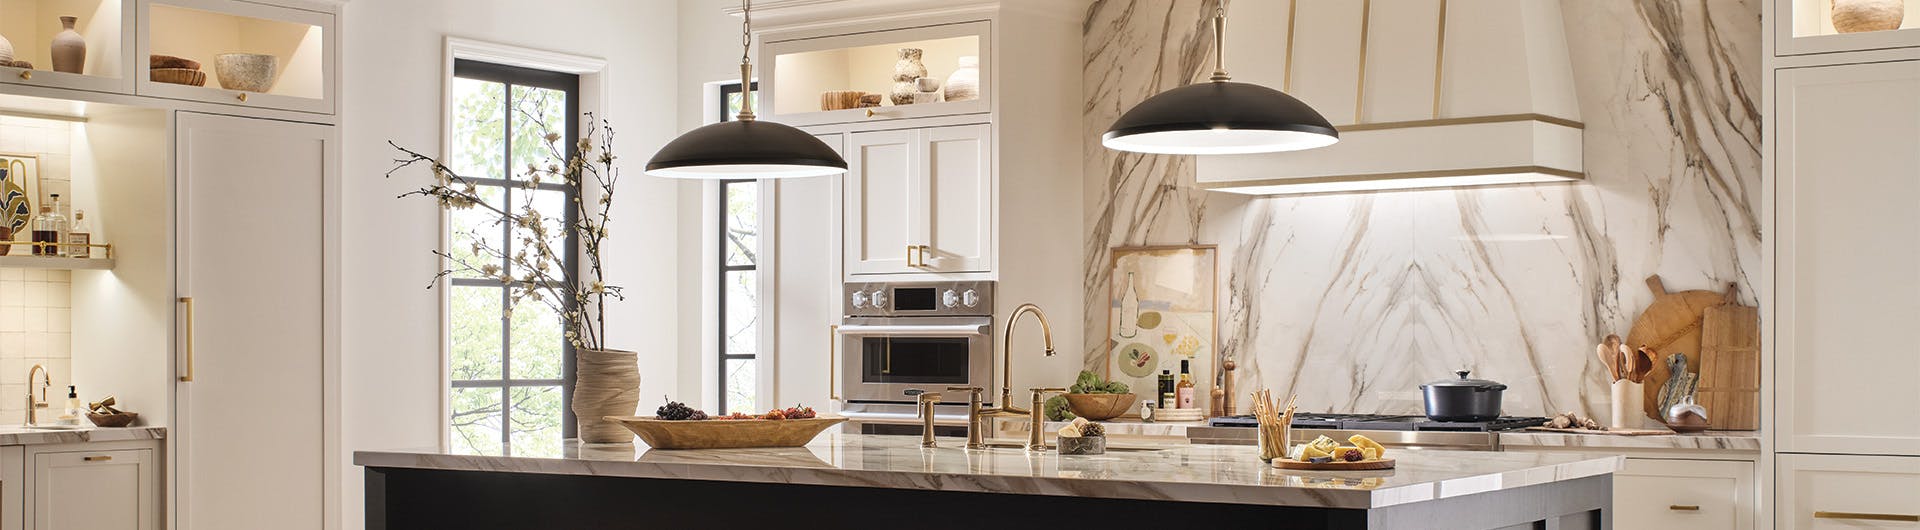 Kitchen with white and black cabinets and marble countertops with two delarosa pendants hanging over center island